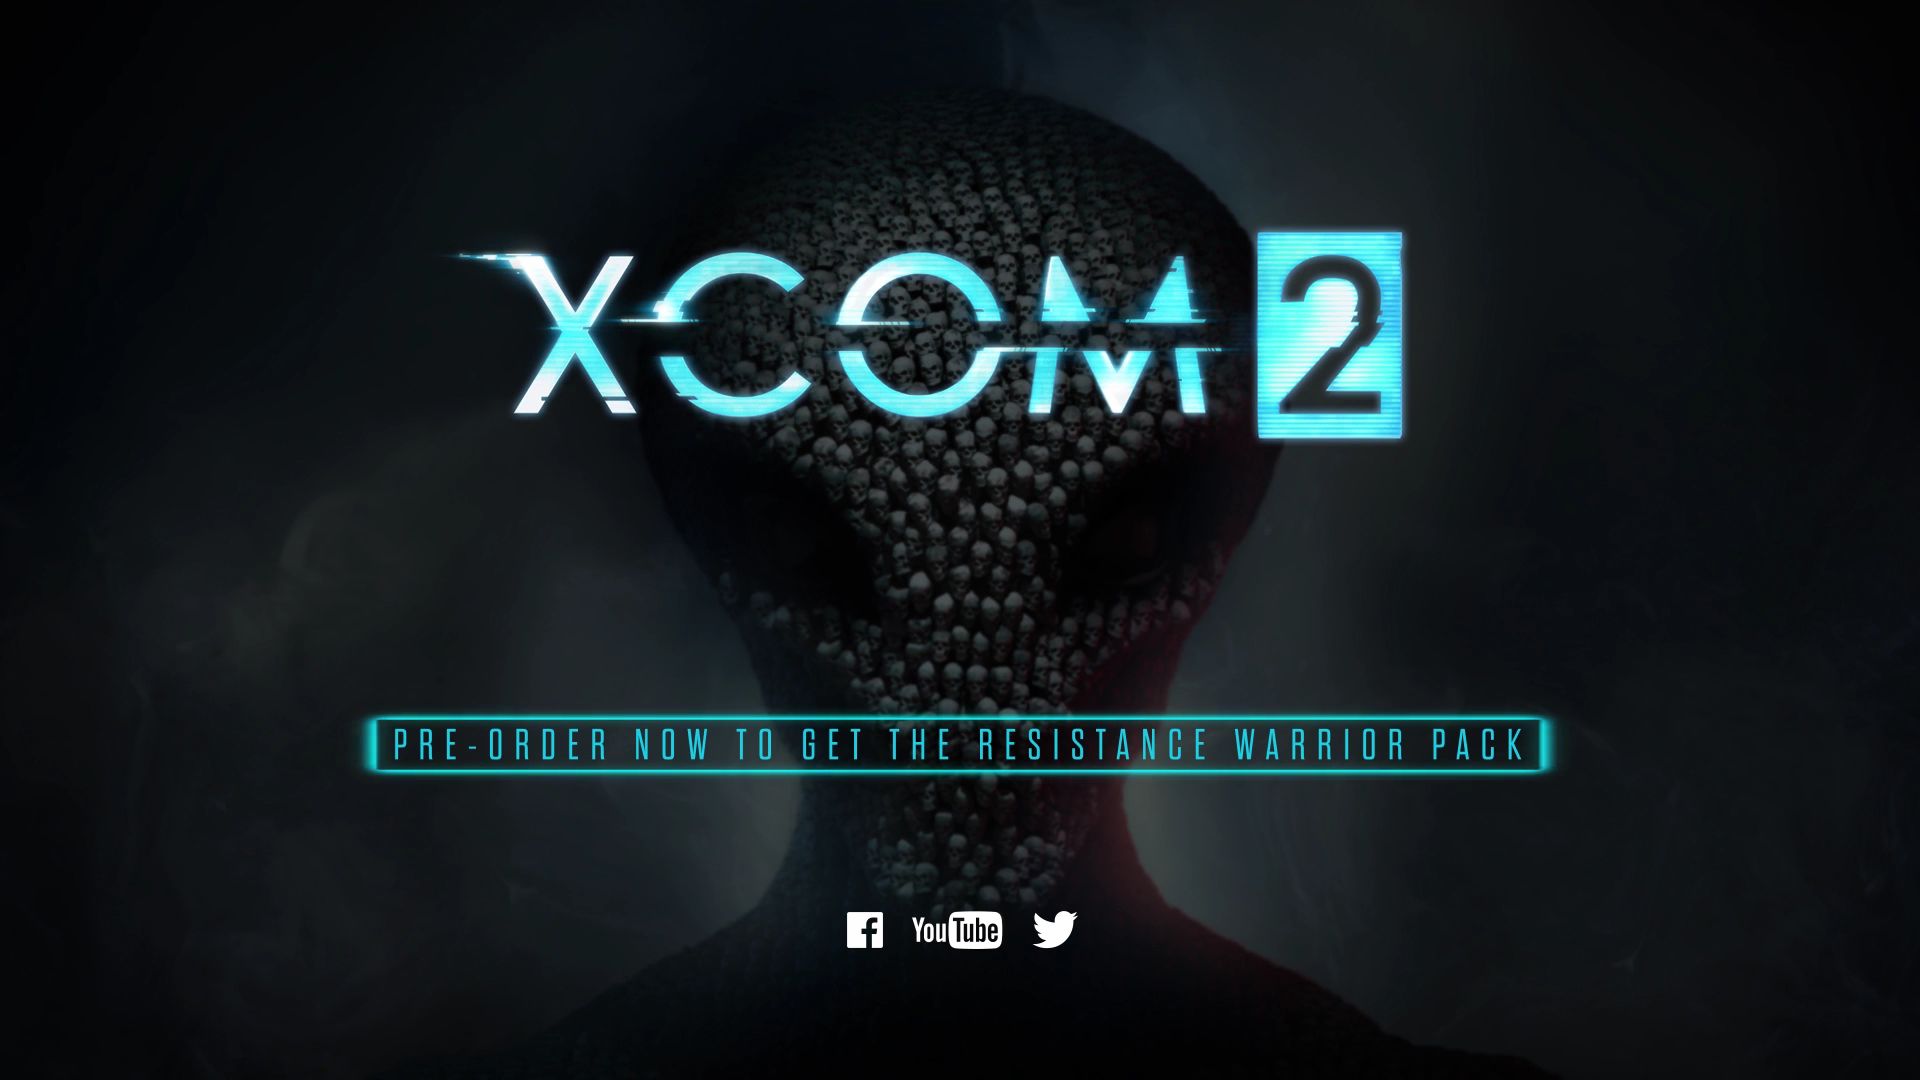 xcom-2-launches-only-with-nvidia-support-intel-and-amd-to-follow-499868-2.jpg